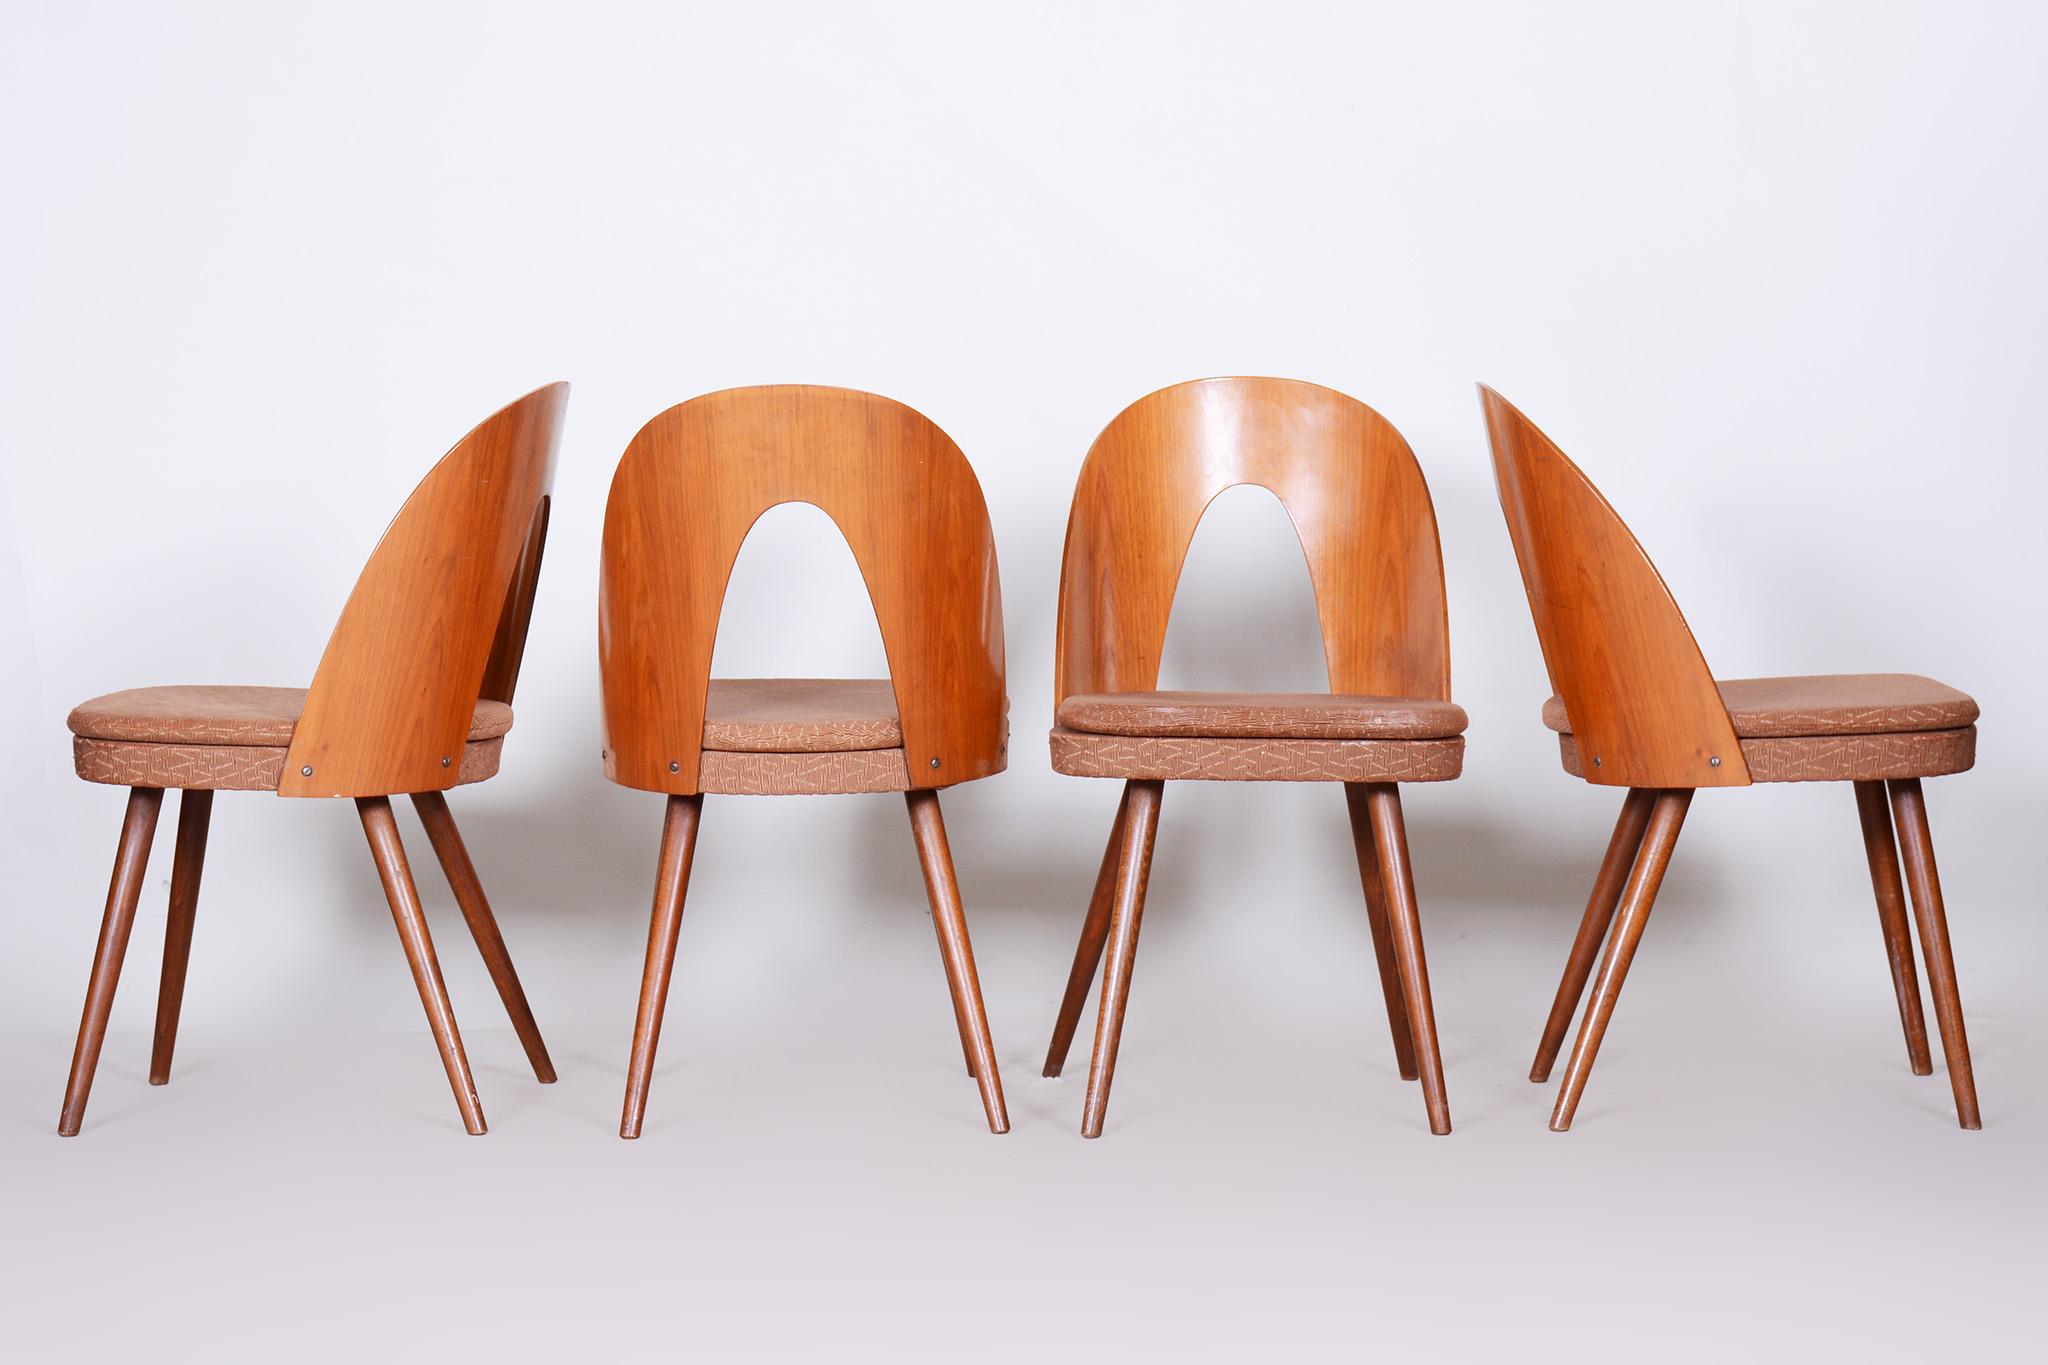 Set of Four Mid-Century Modern Chairs Made in 1950s Czechia by Antonín Šuman In Good Condition For Sale In Horomerice, CZ